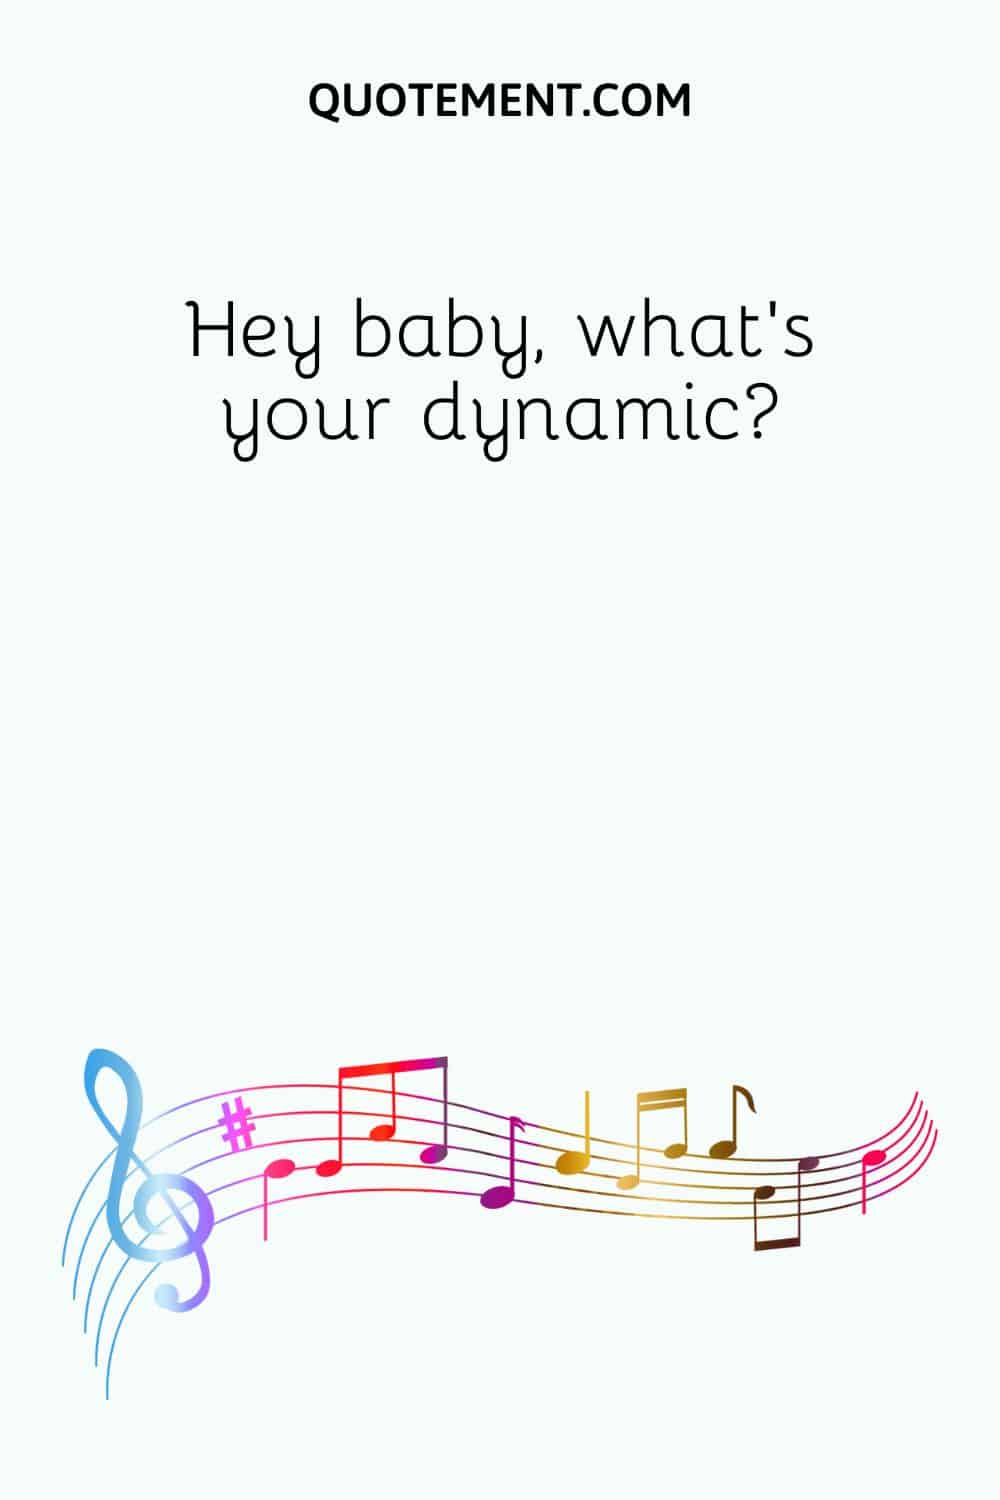 Hey baby, what's your dynamic